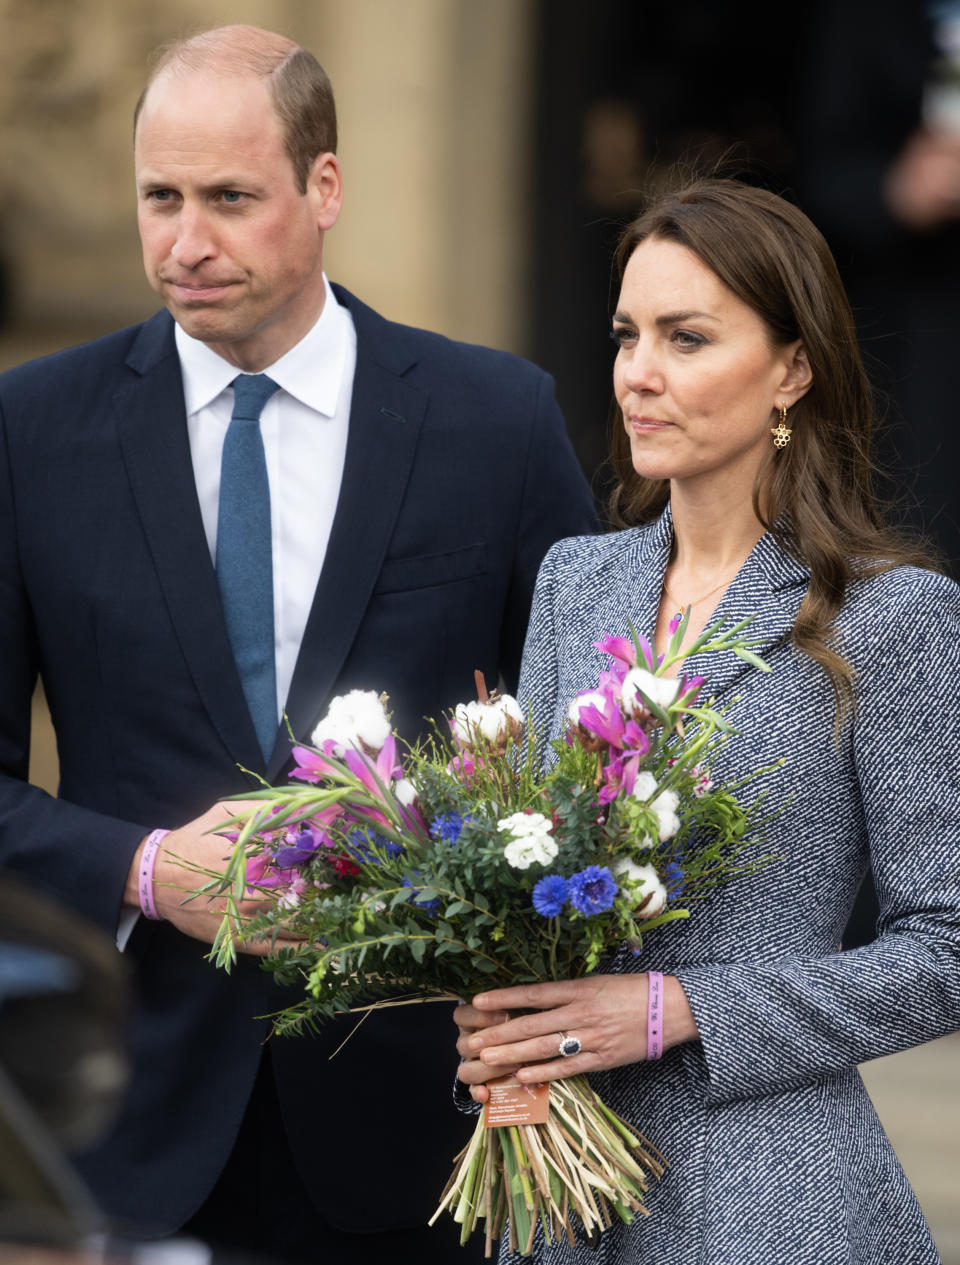 Prince William and the Duchess of Cambridge are to be the sole speakers during the Mental Health minute, pictured at the official opening ofThe Glade Of Light Memorial at Manchester Arena on May 10, 2022